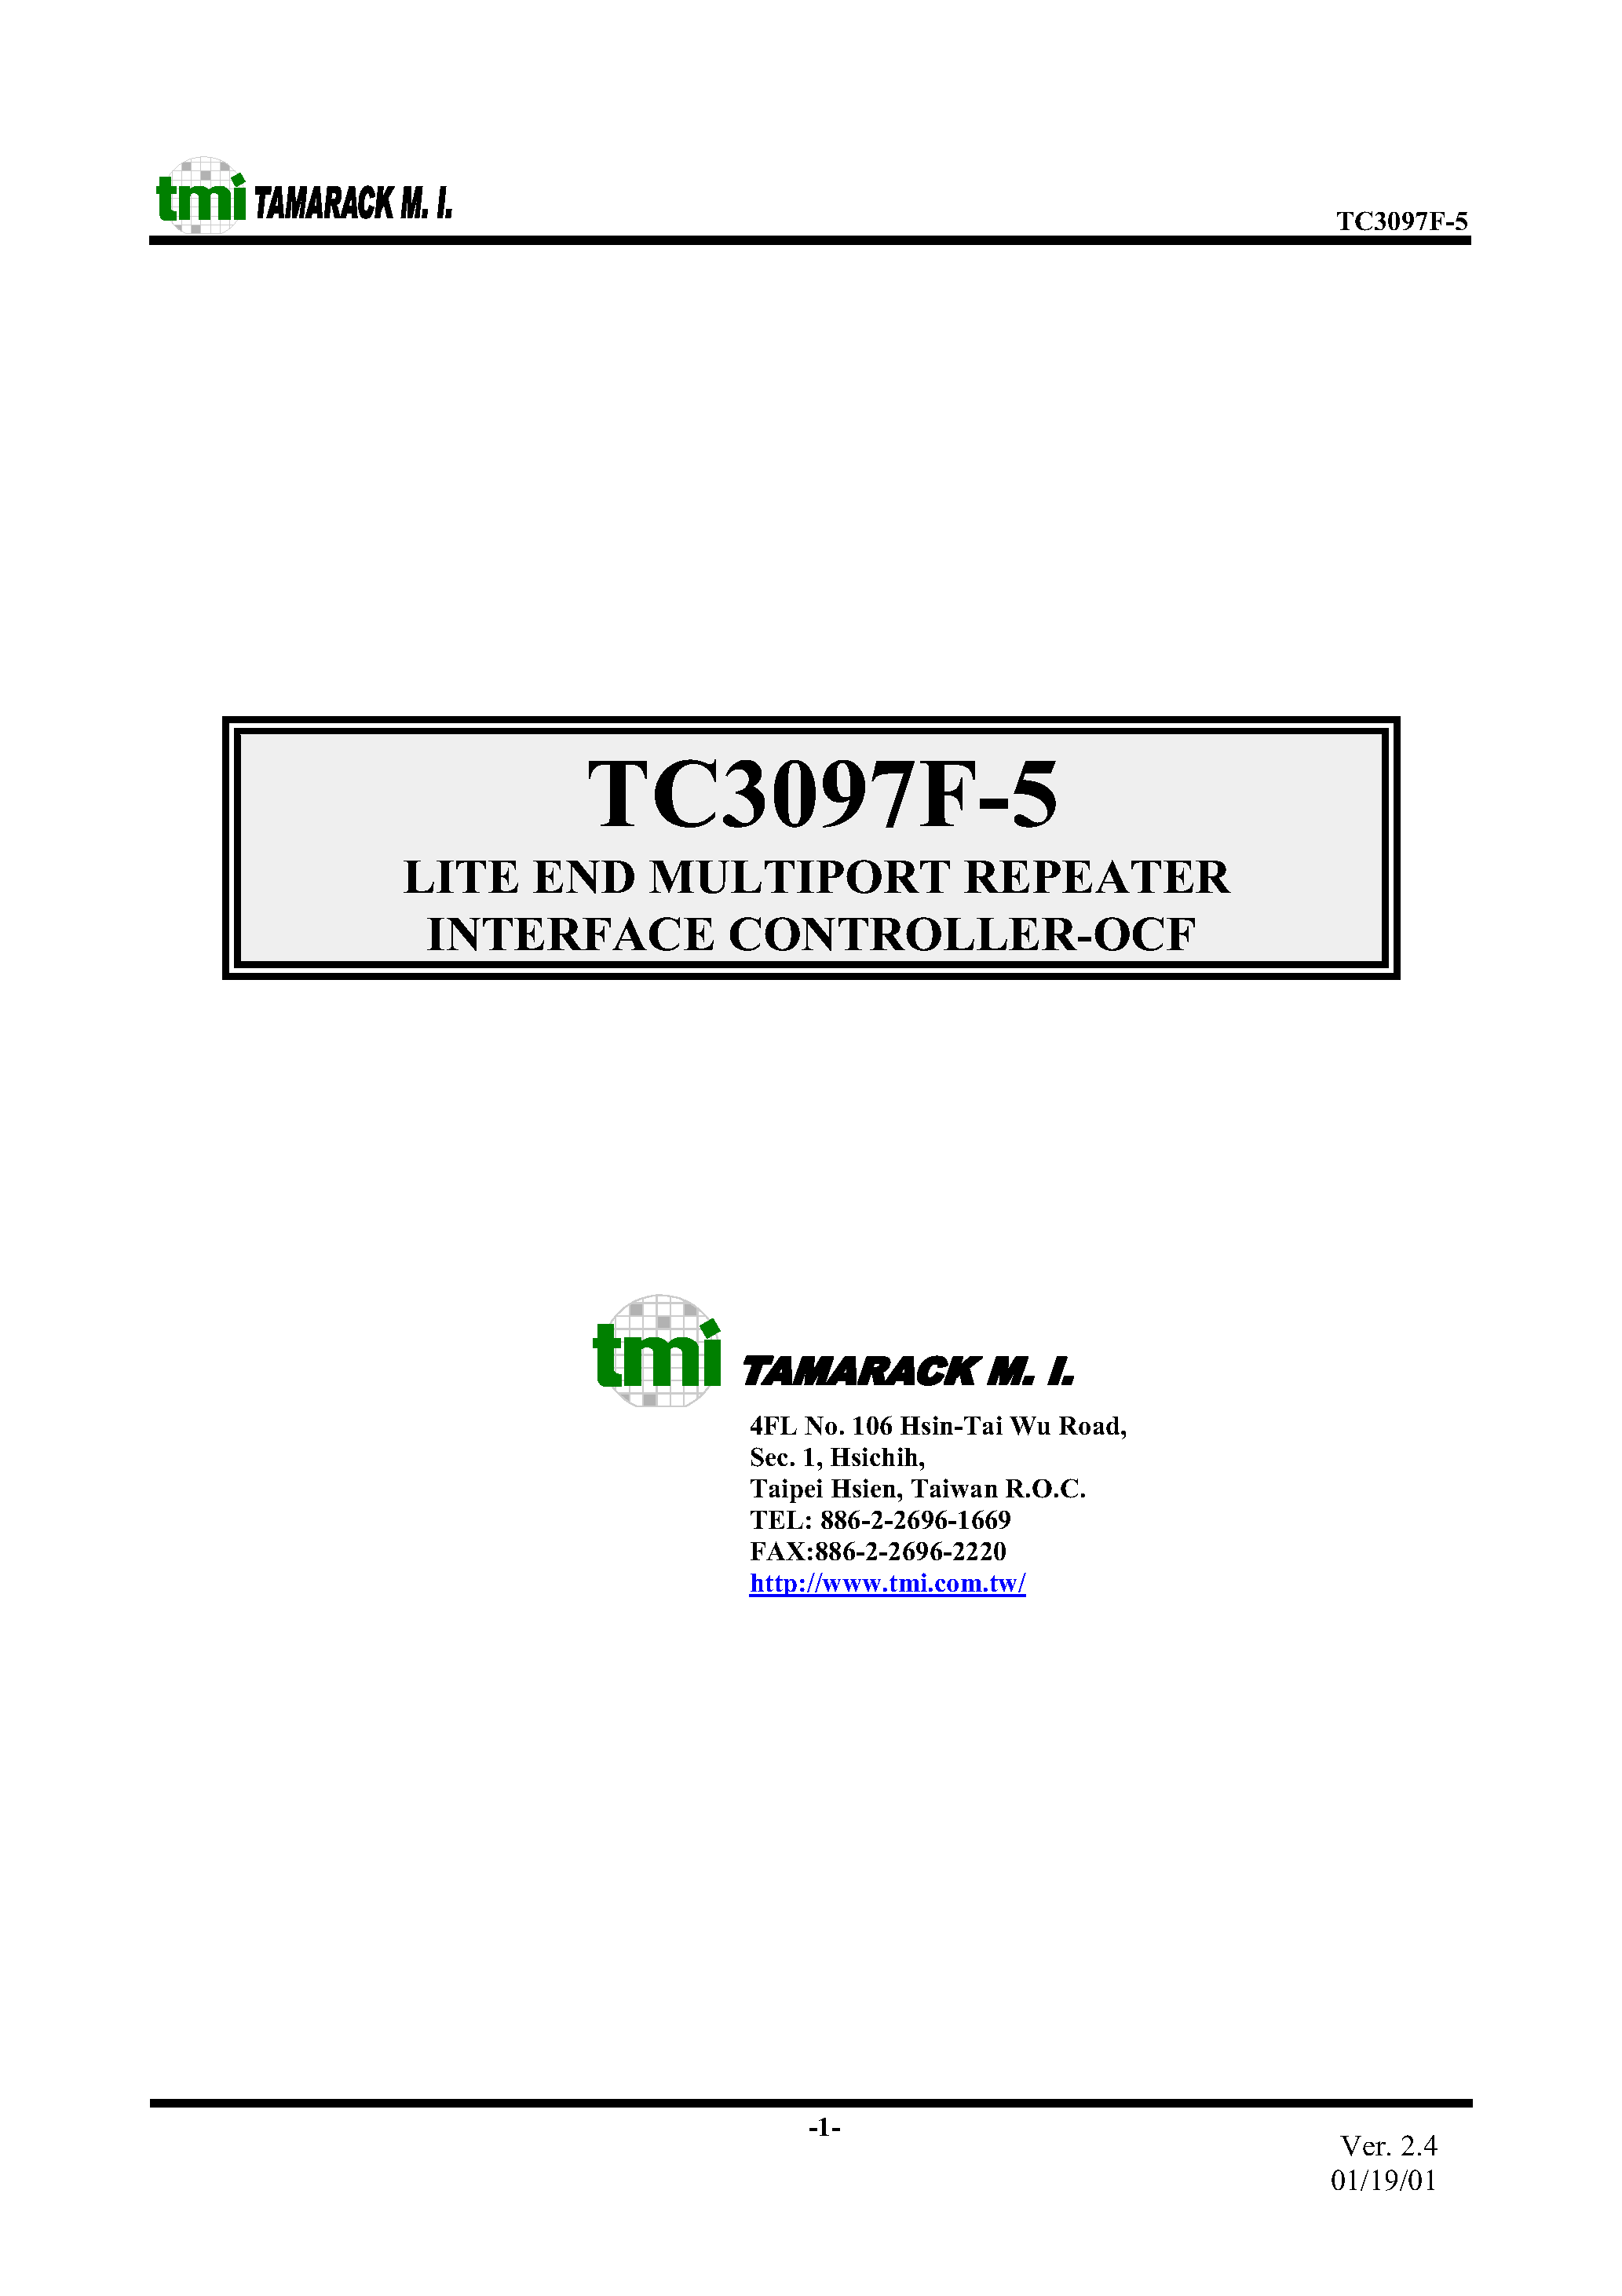 Datasheet TC3097F-5 - LITE END MULTIPORT REPEATER INTERFACE CONTROLLER - OCF page 1